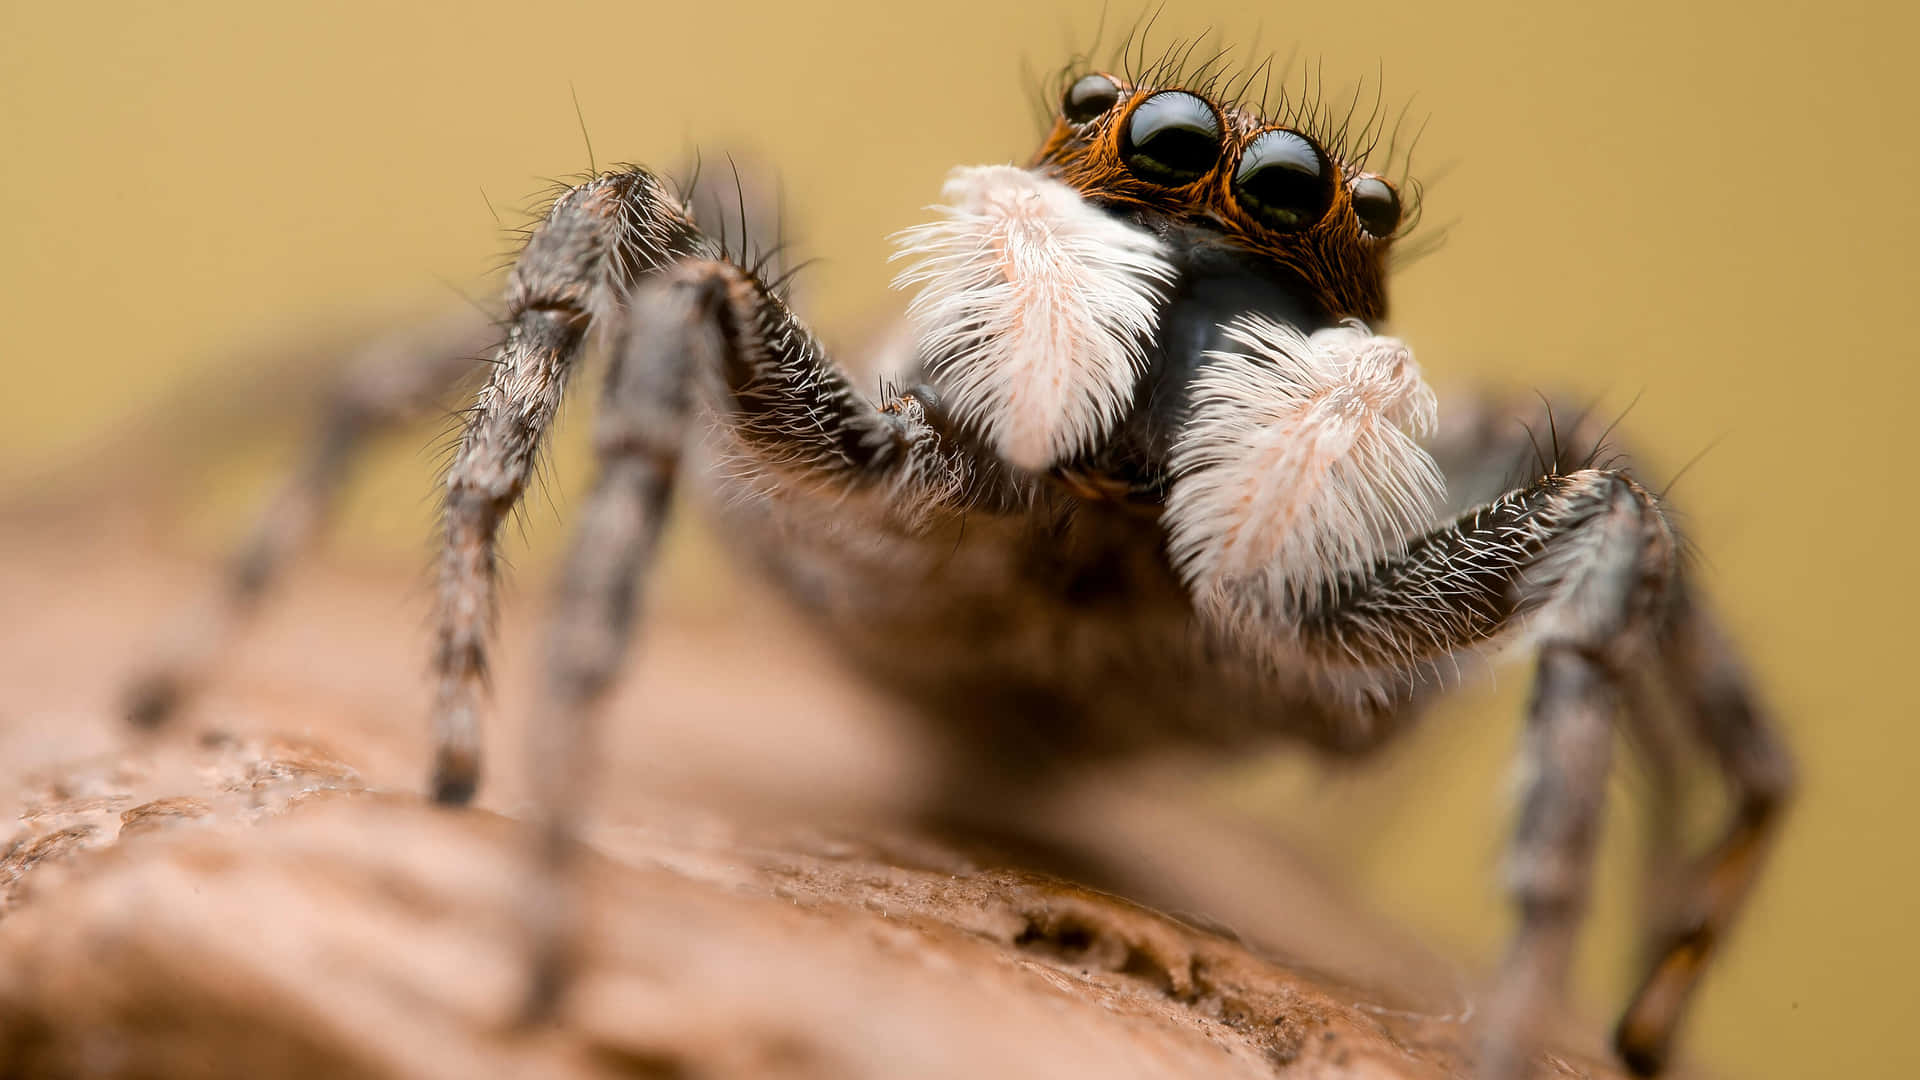 Caption: Close-up of a Brown Recluse Spider on a web Wallpaper